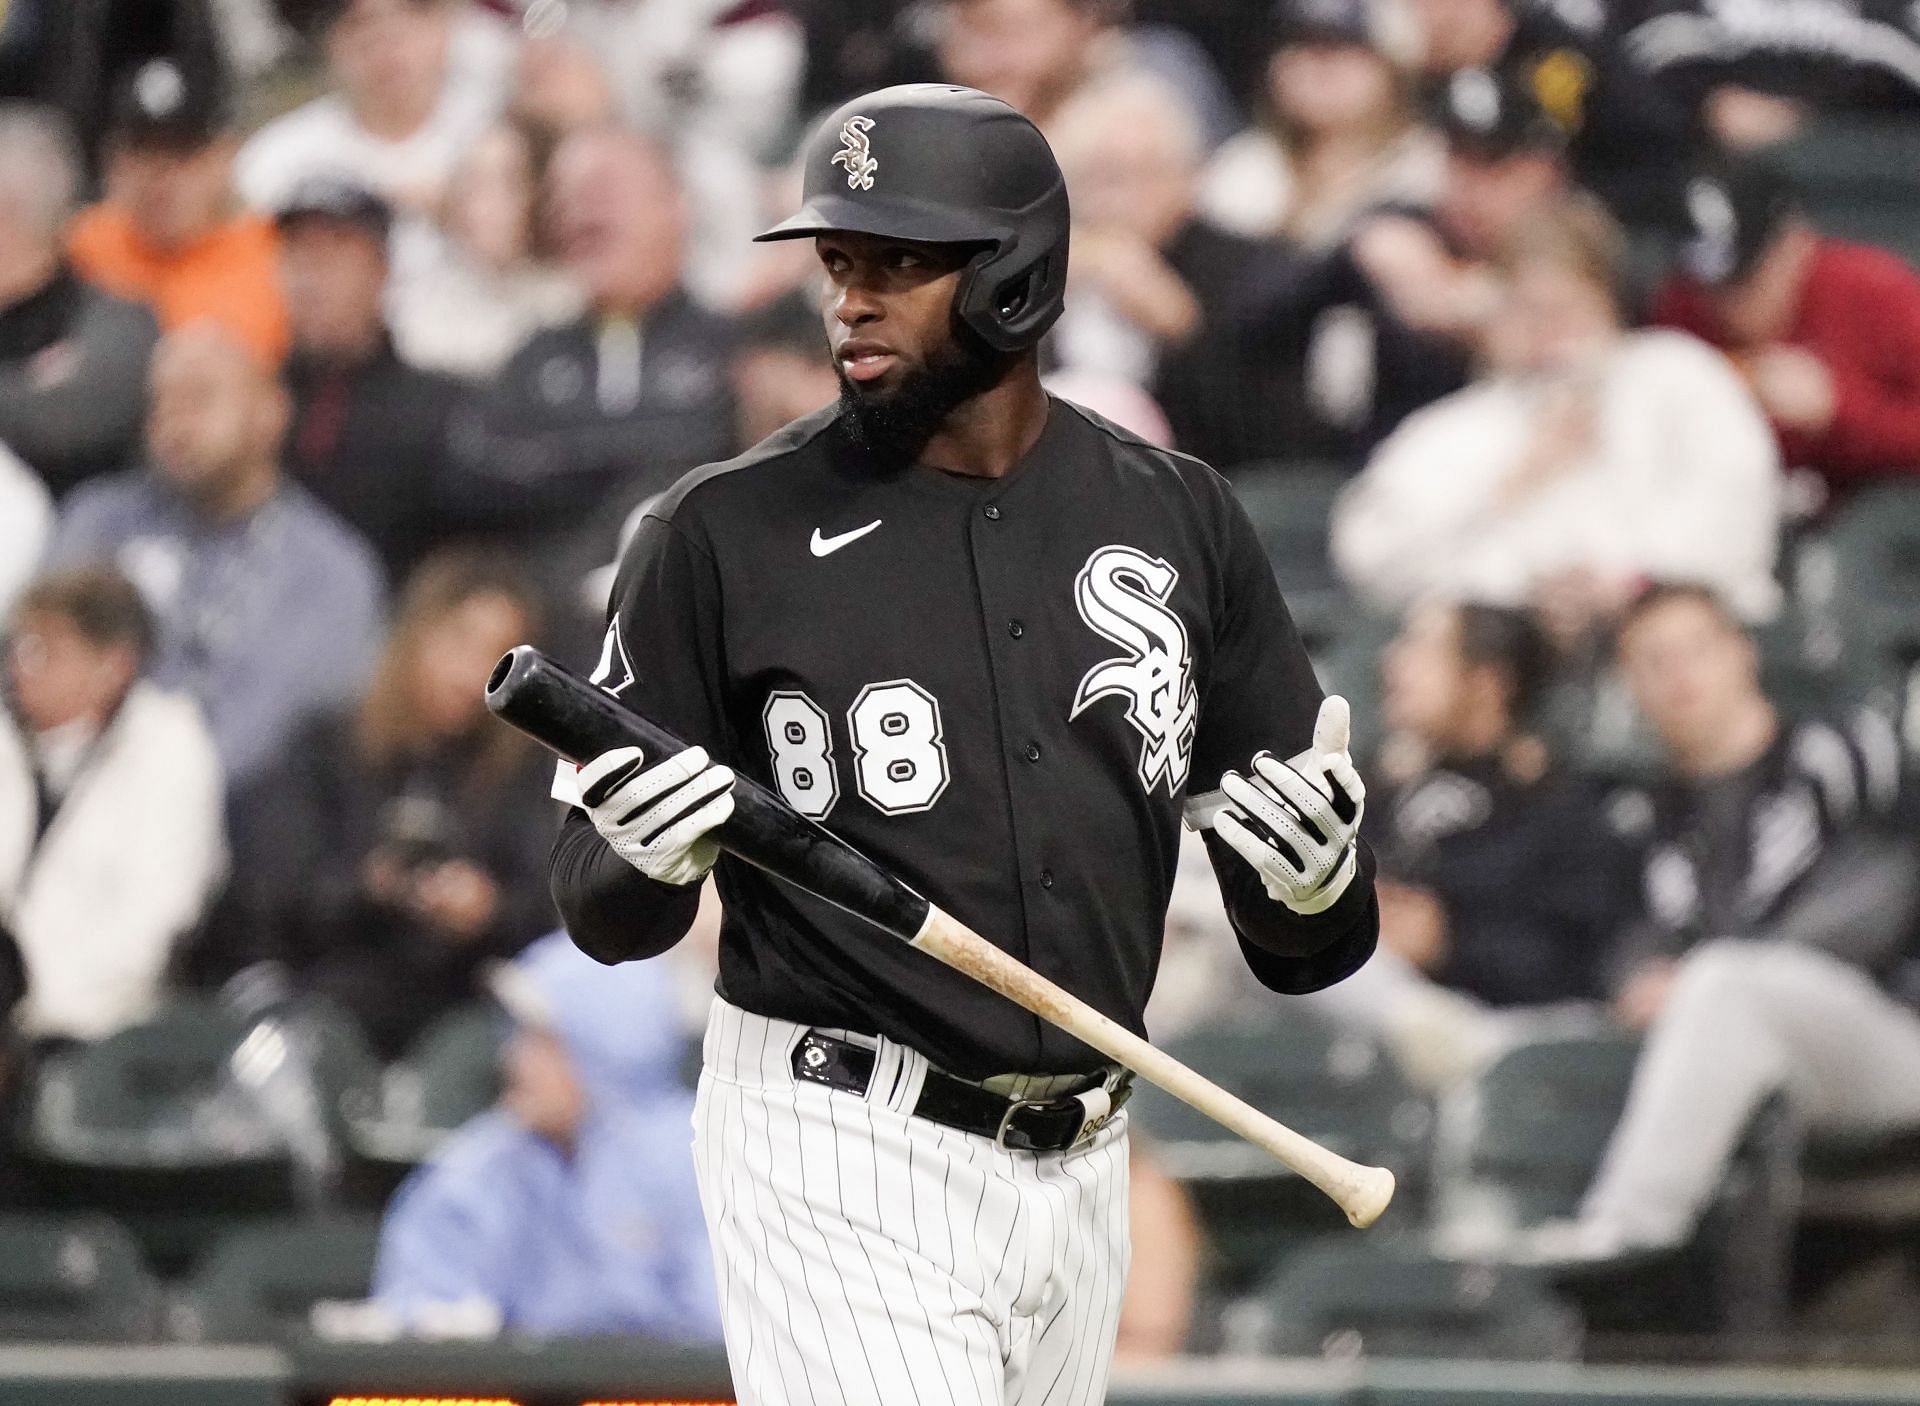 Luis Robert Jr. of the Chicago White Sox reacts after striking out.